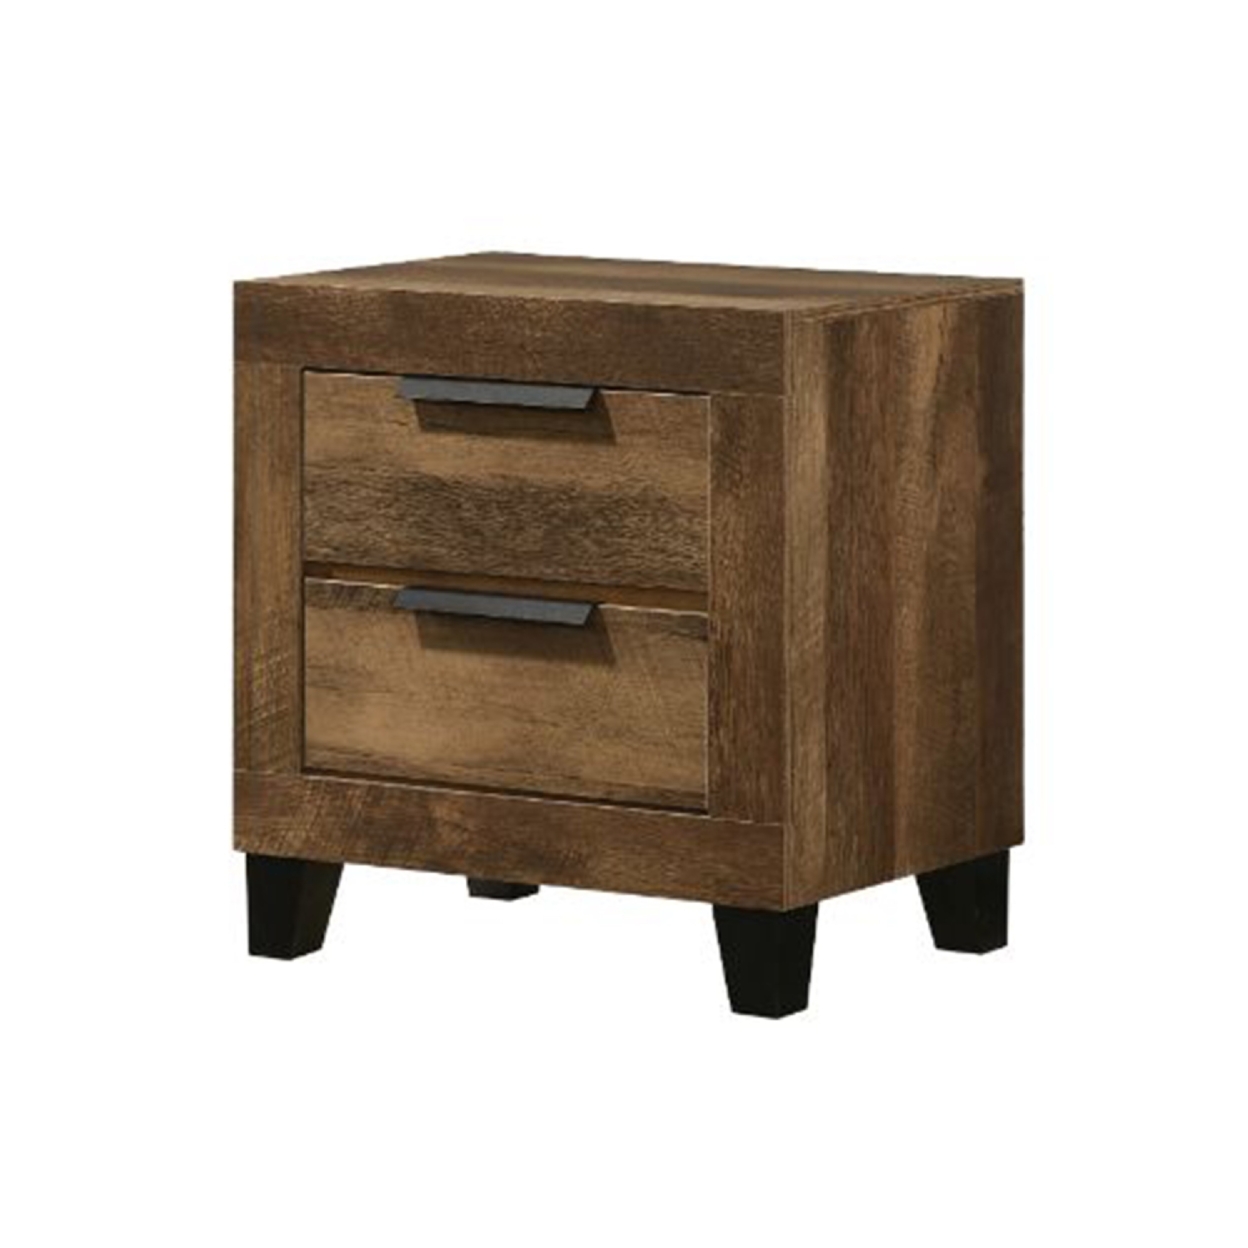 Nightstand With 2 Drawers And Plank Style, Rustic Oak Brown- Saltoro Sherpi